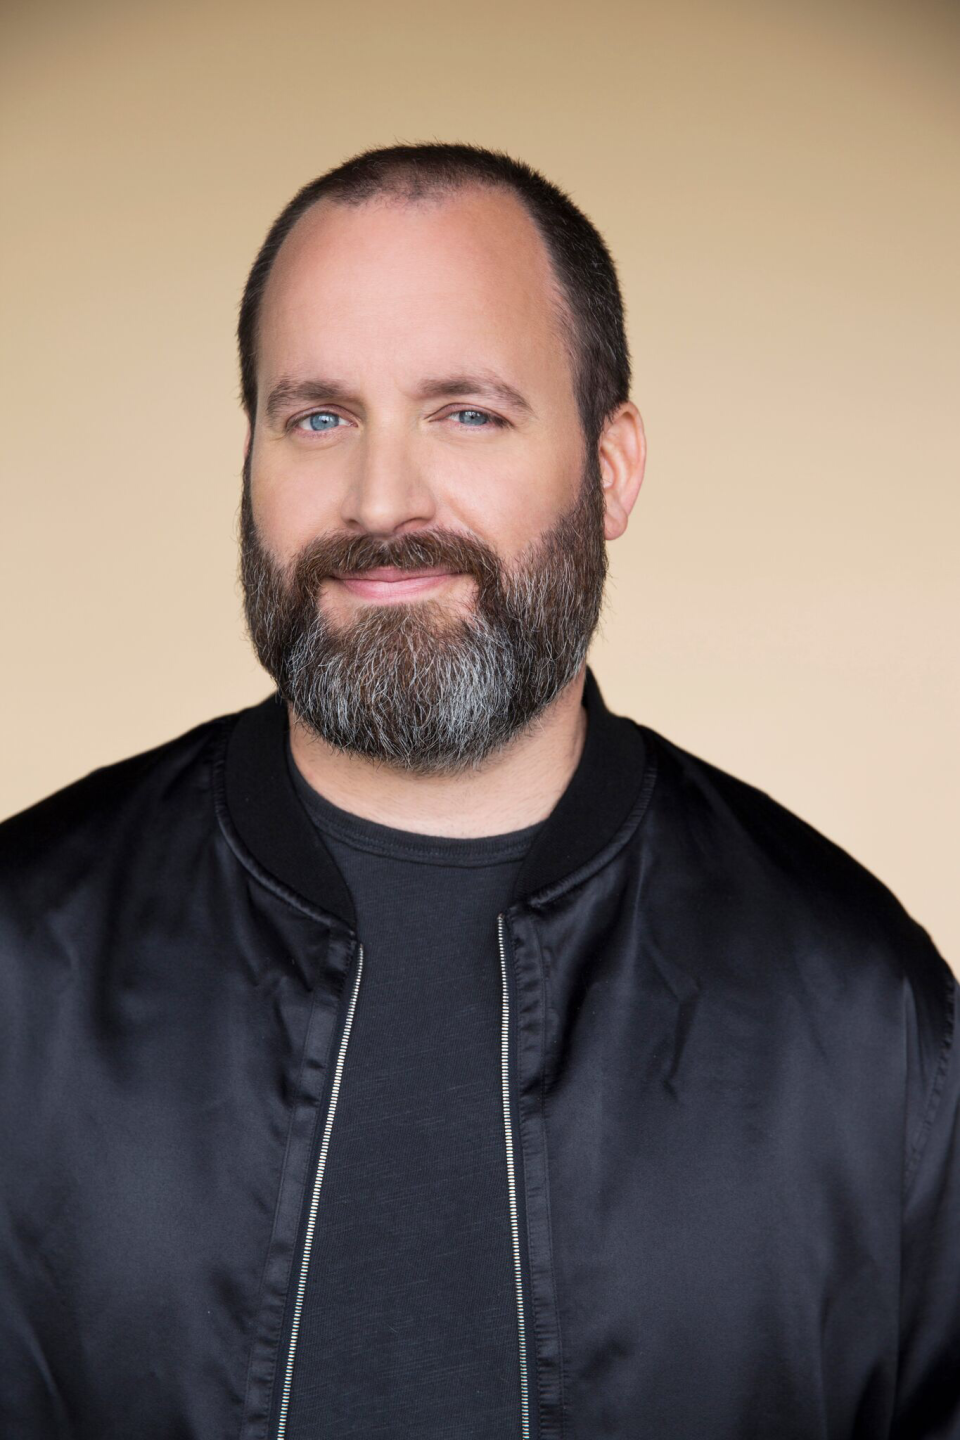 Comedian Tom Segura will perform on June 18, 2022 at Spotlight 29 Casino in Coachella, Calif., he co-hosts two of the most popular comedy podcasts, “Your Mom’s House,” with his wife comedian Christina P. and “Two Bears, One Cave” with fellow comedian Bert Kreischer